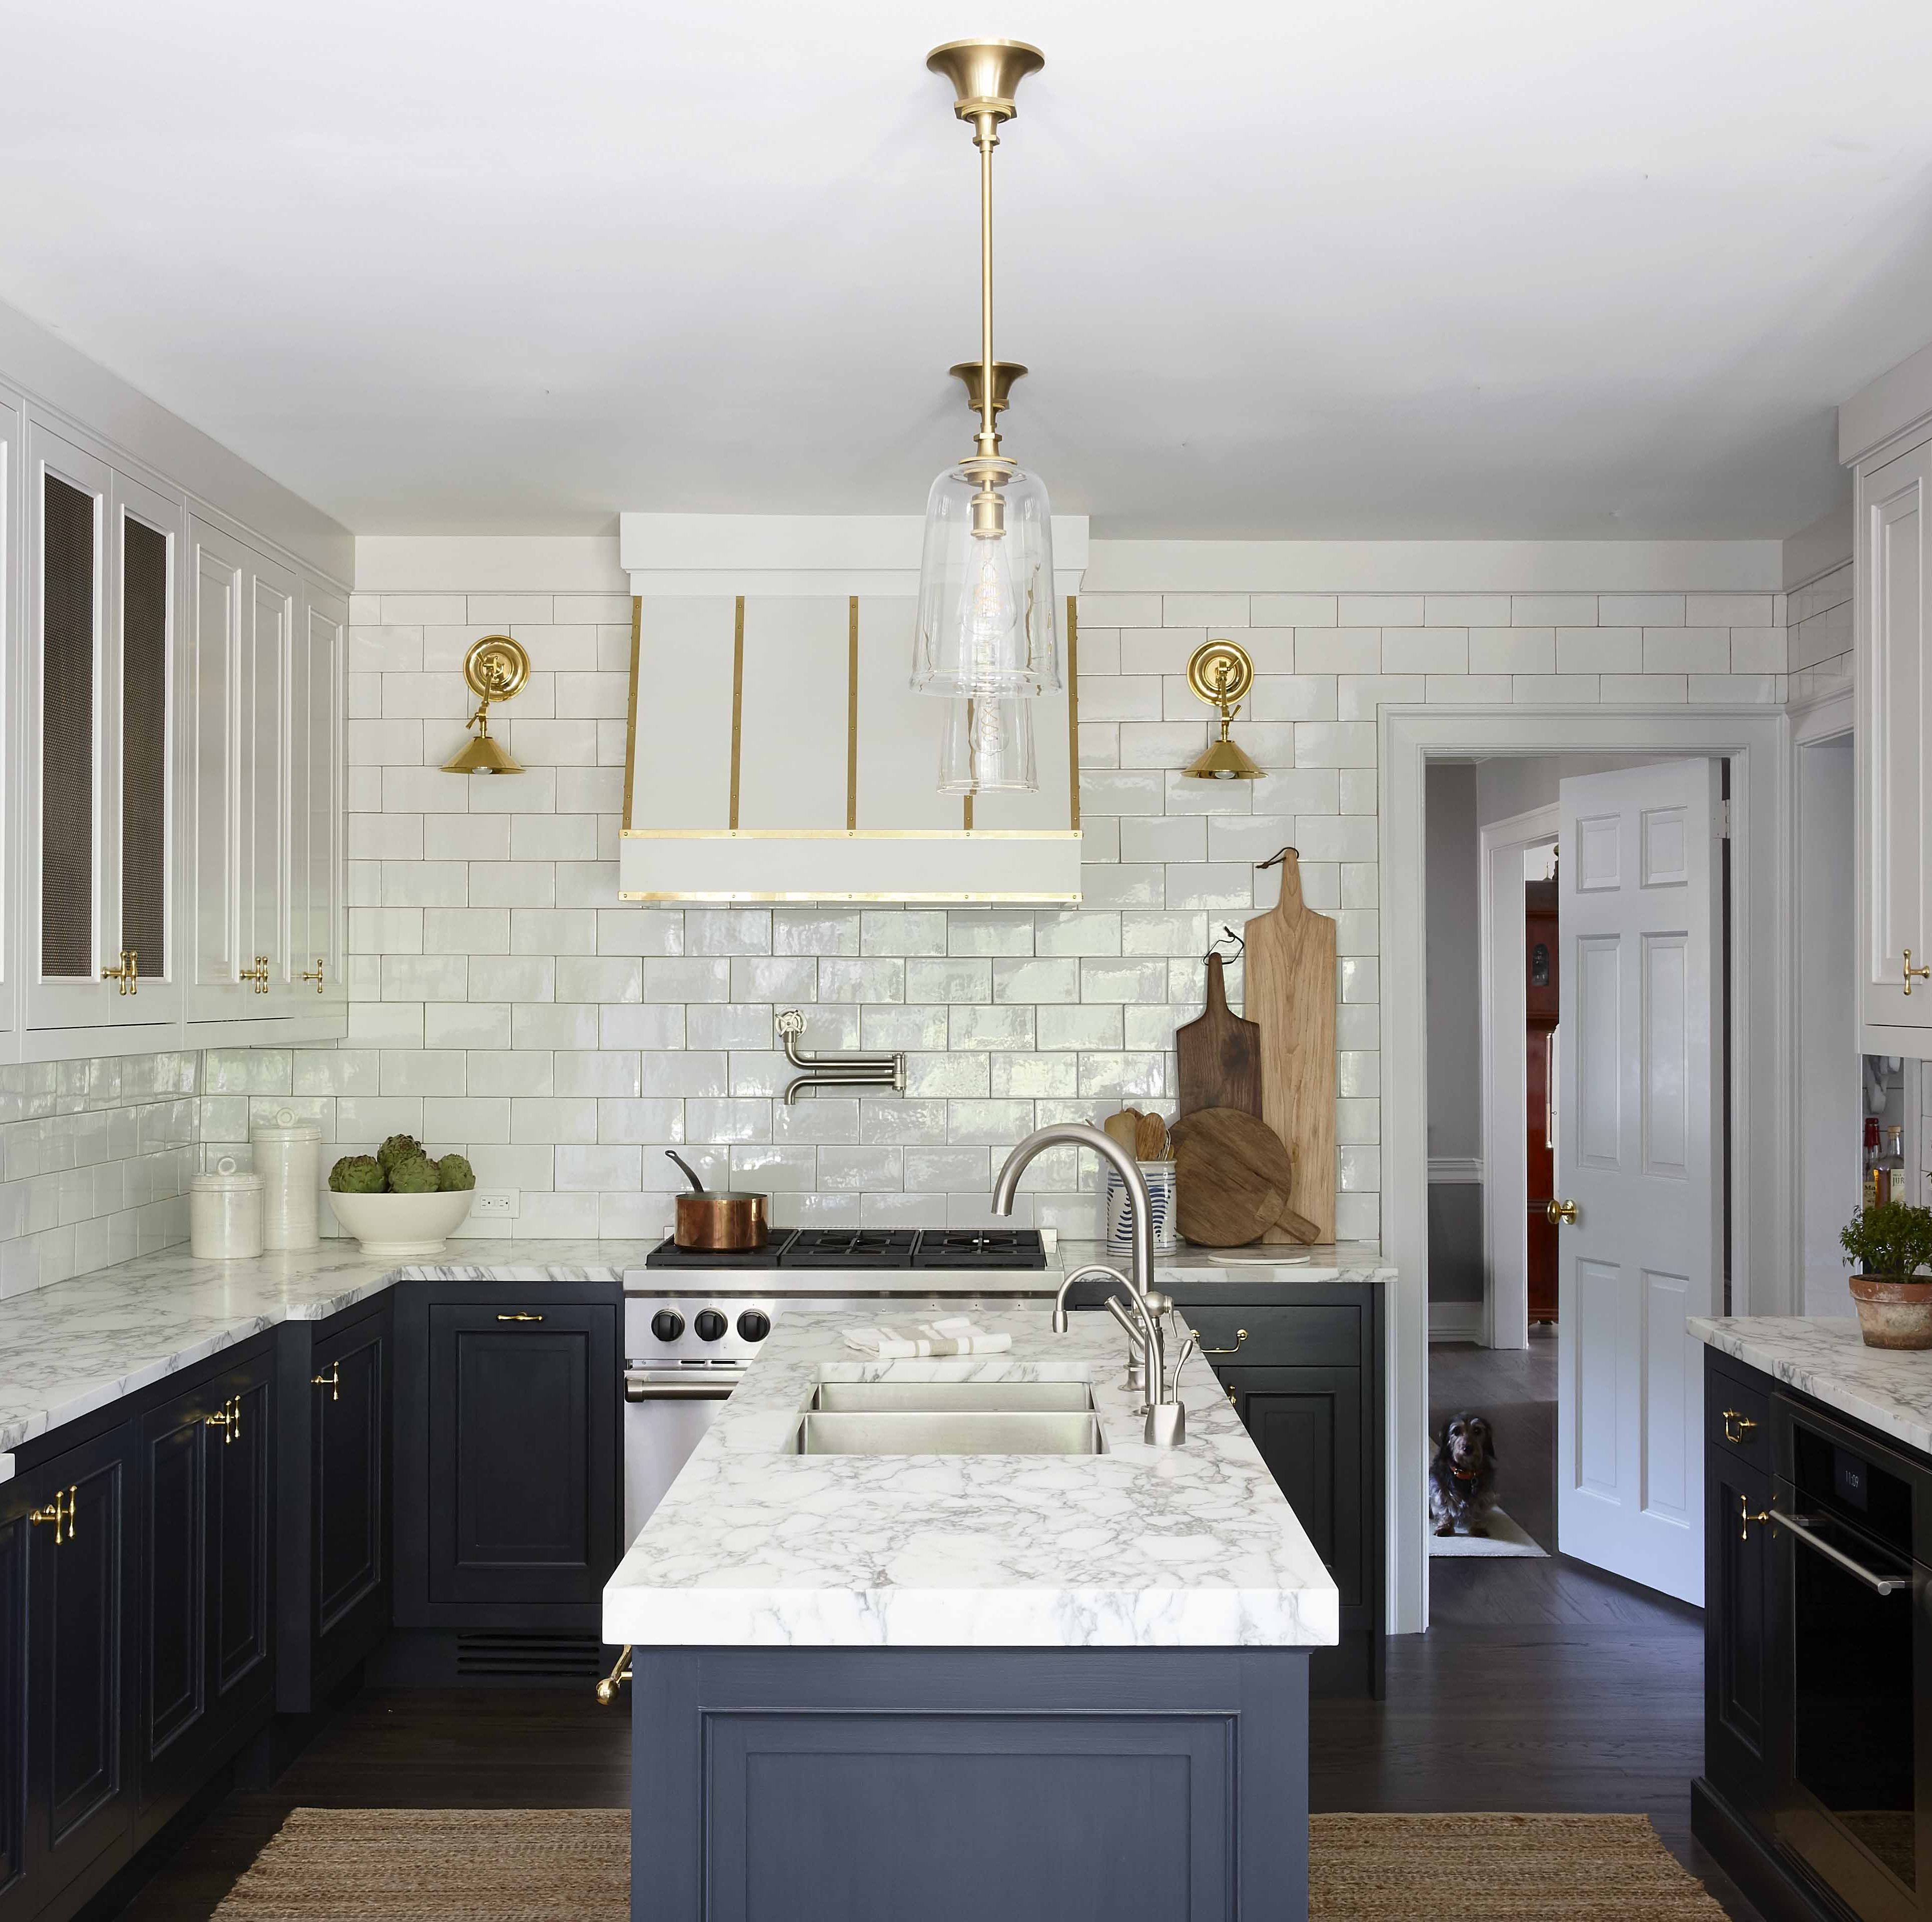 Inside The Perfect Kitchen Of Waterworks Co-Founder Barbara Sallick